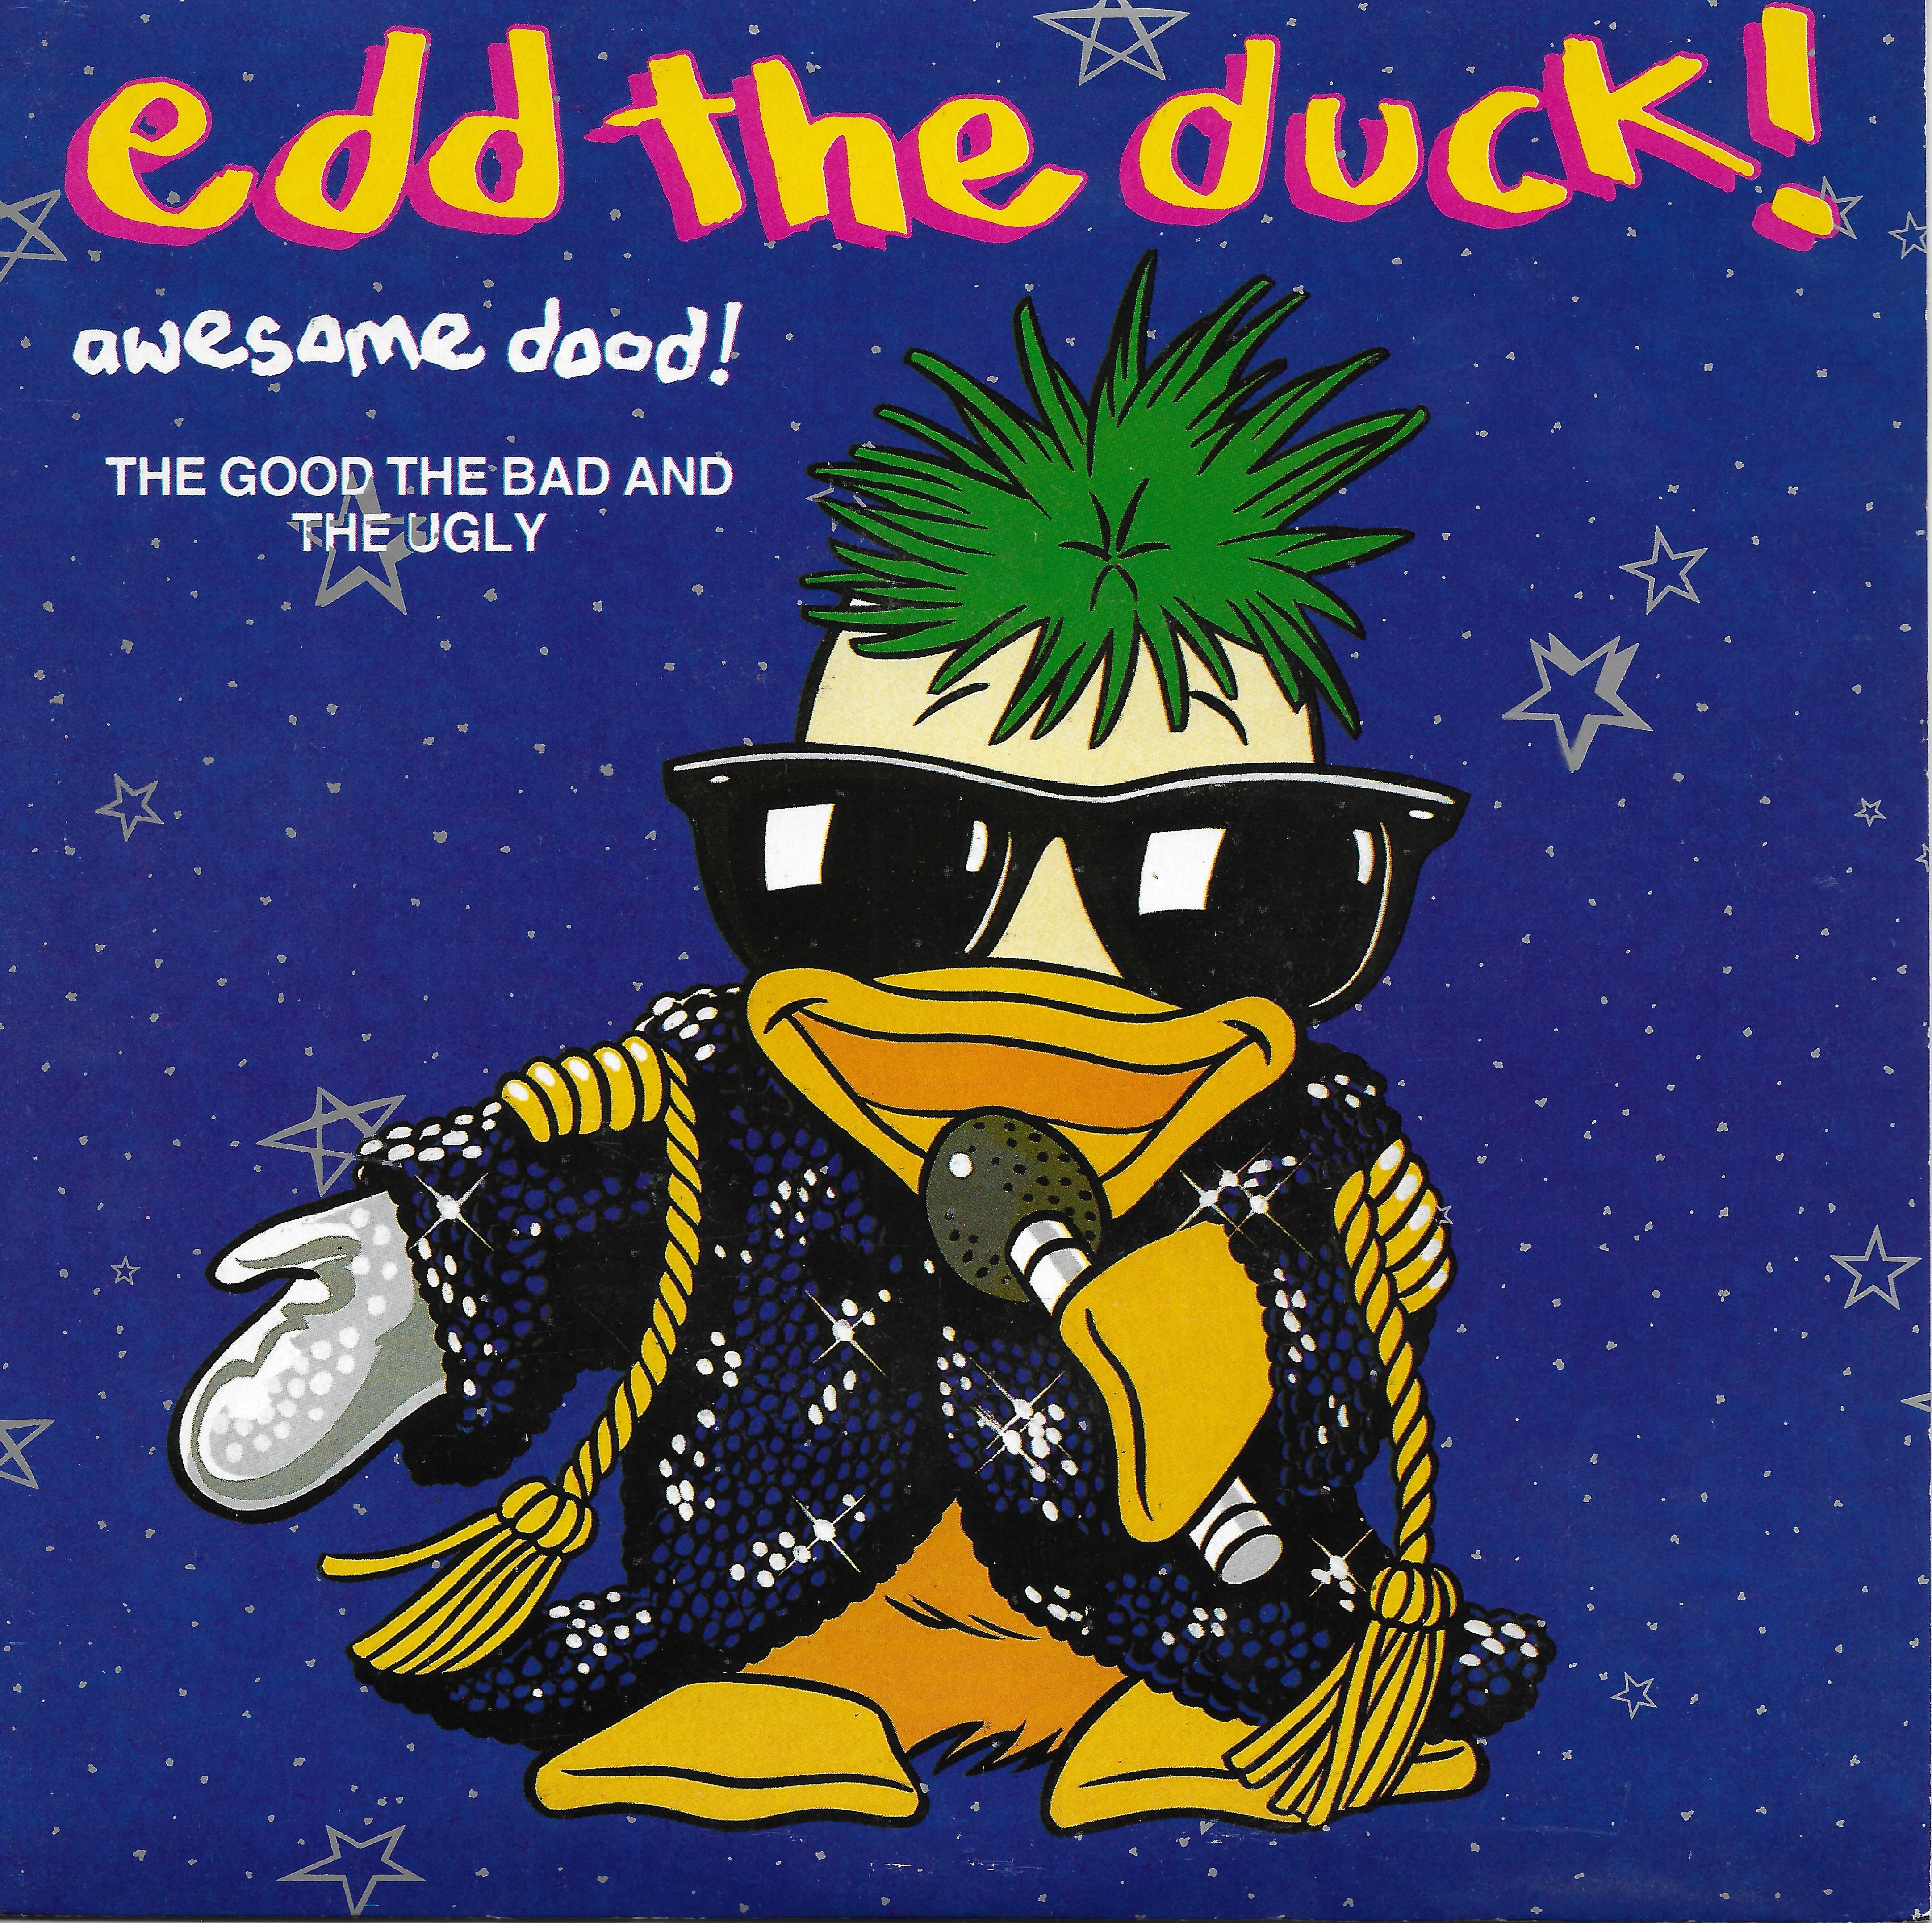 Picture of RESL 001 Awesome dood! by artist Edd The Duck from the BBC singles - Records and Tapes library